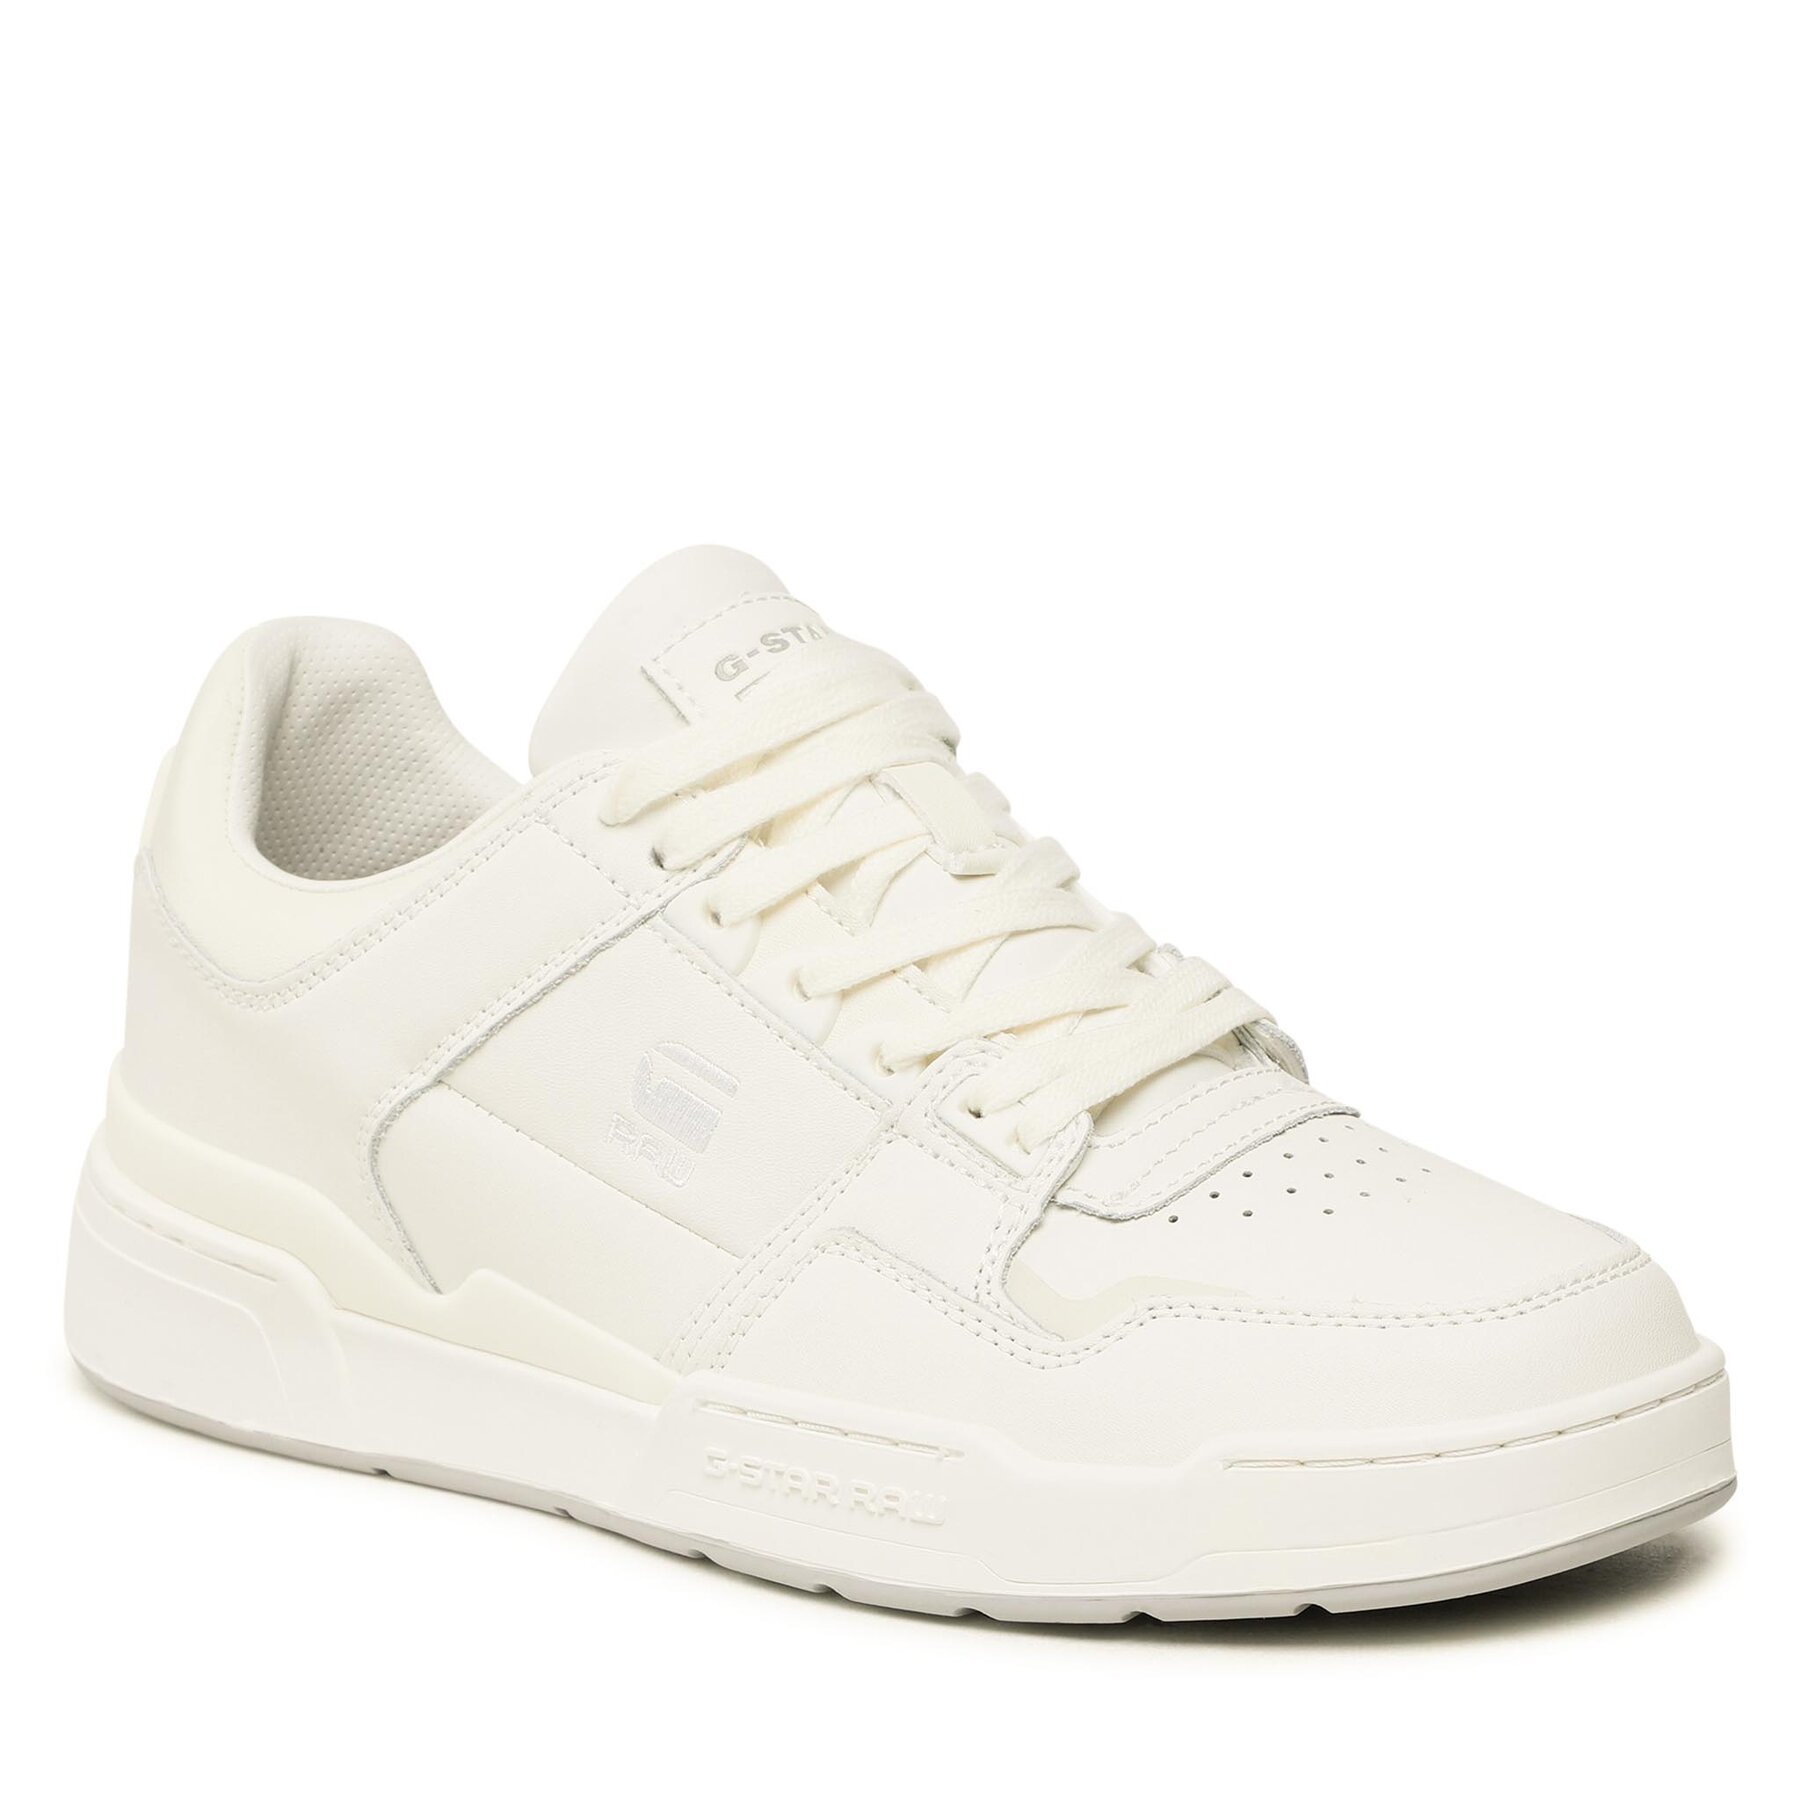 Sneakers G-Star Raw Attacc Bsc M 2212 40501 White 1000